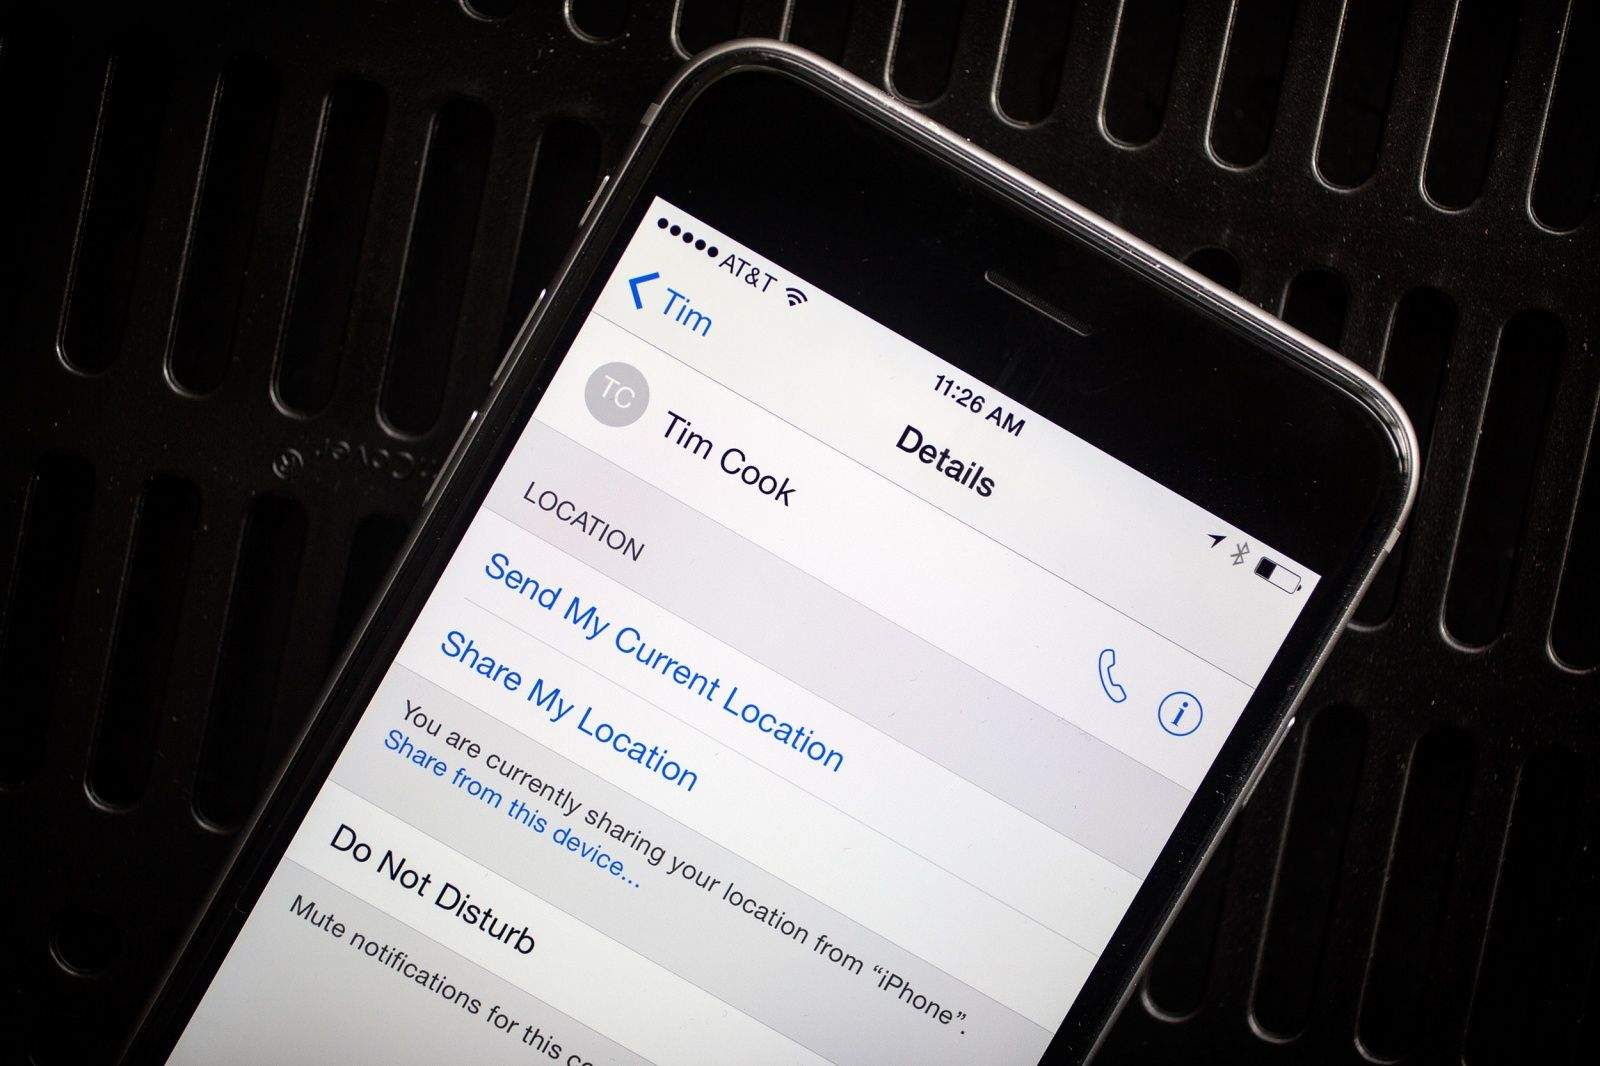 How to share your location from Messages on your iPhone. Photo: Jim Merithew/Cult of Mac